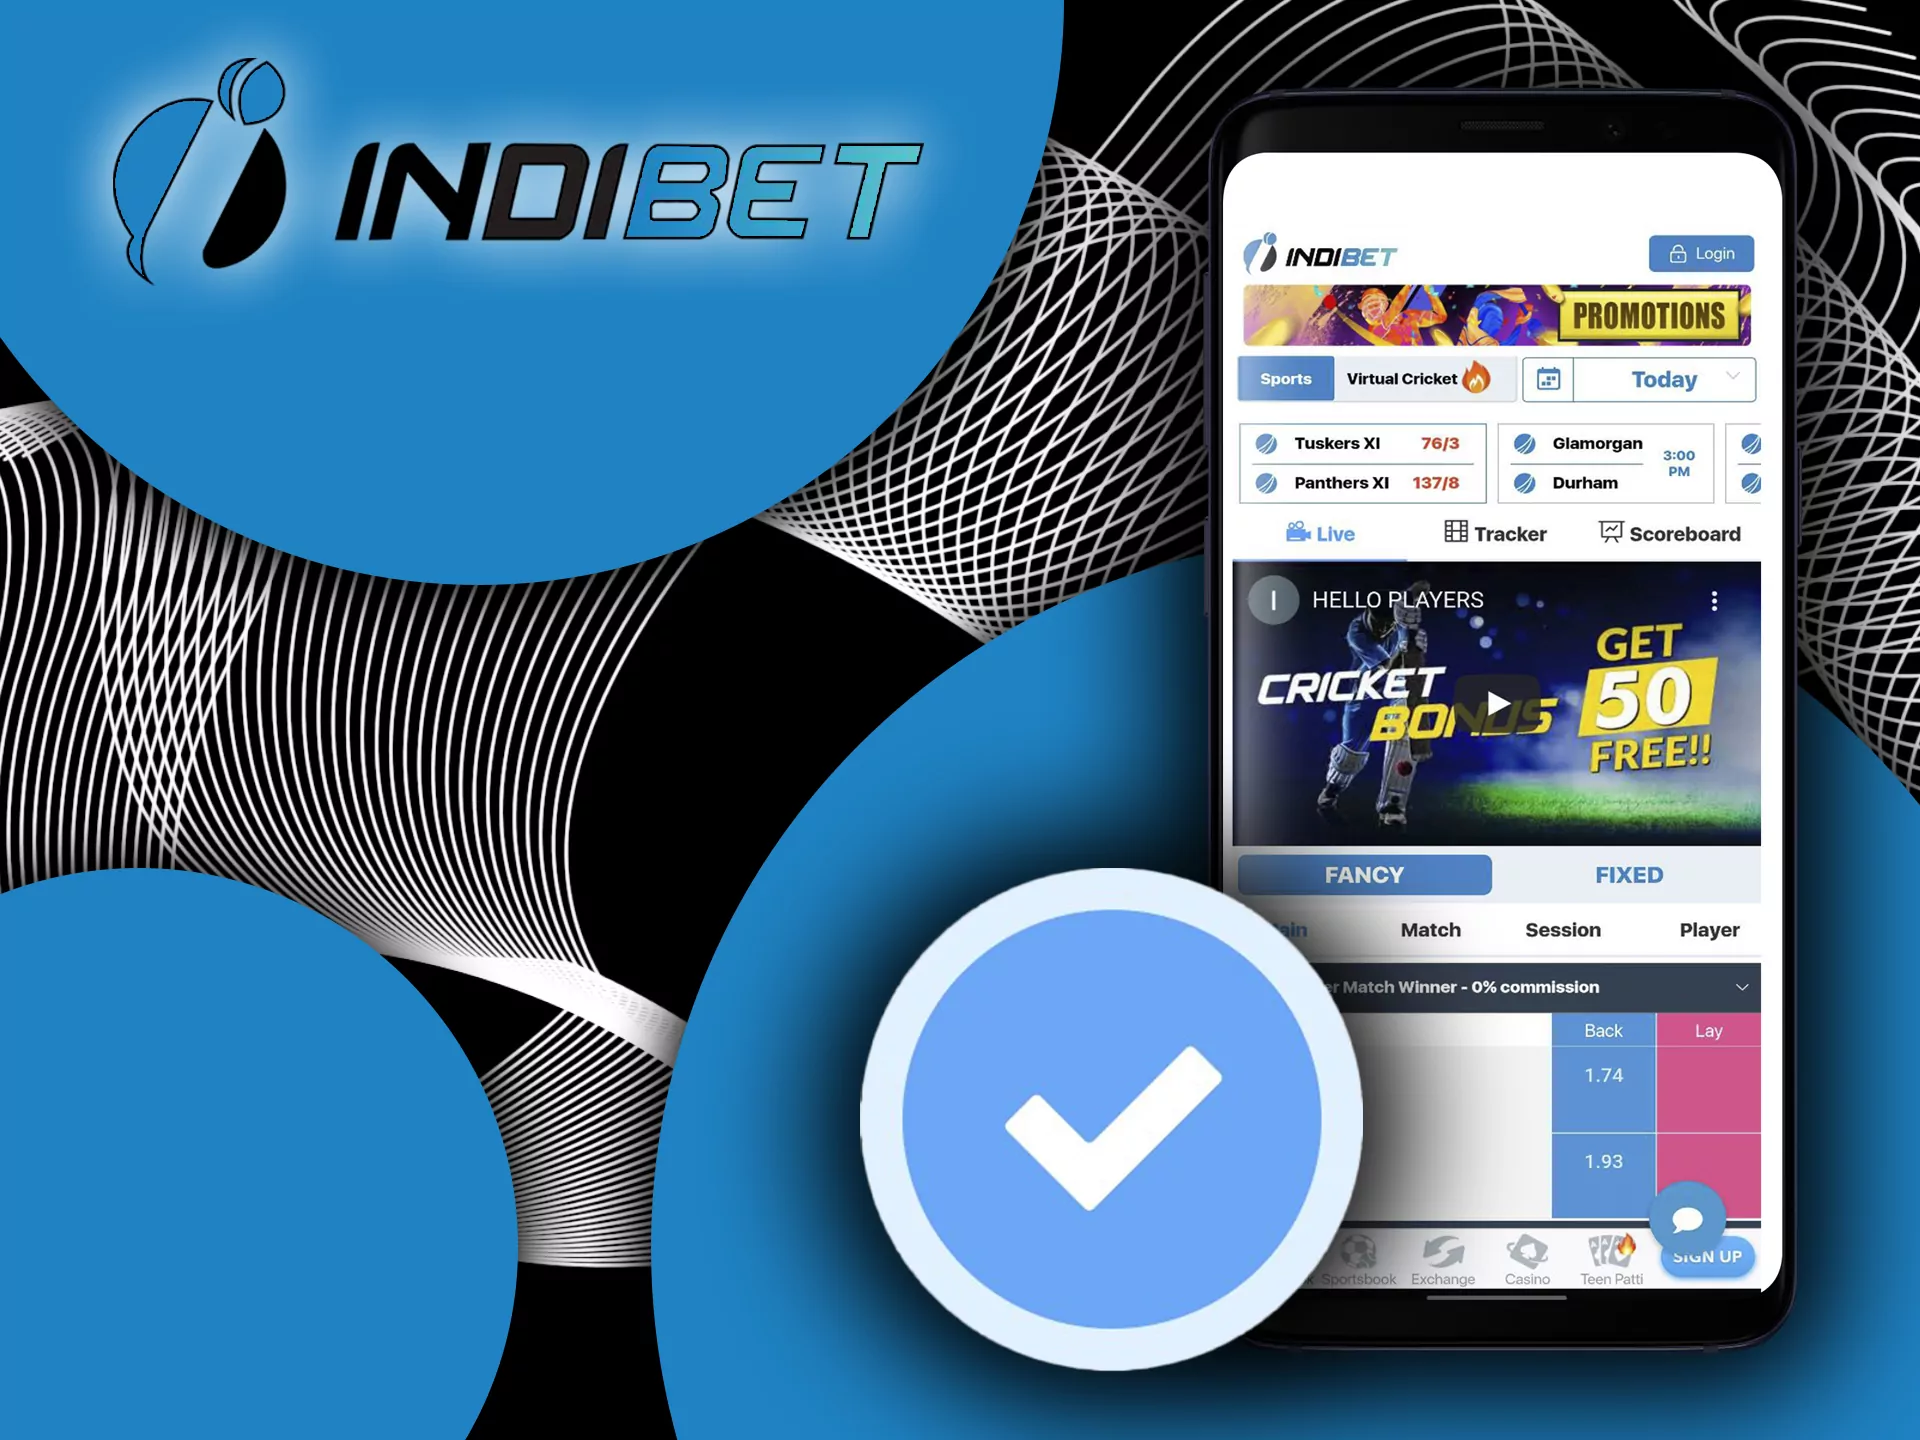 The Most Common Cricket Betting Apps India Debate Isn't As Simple As You May Think